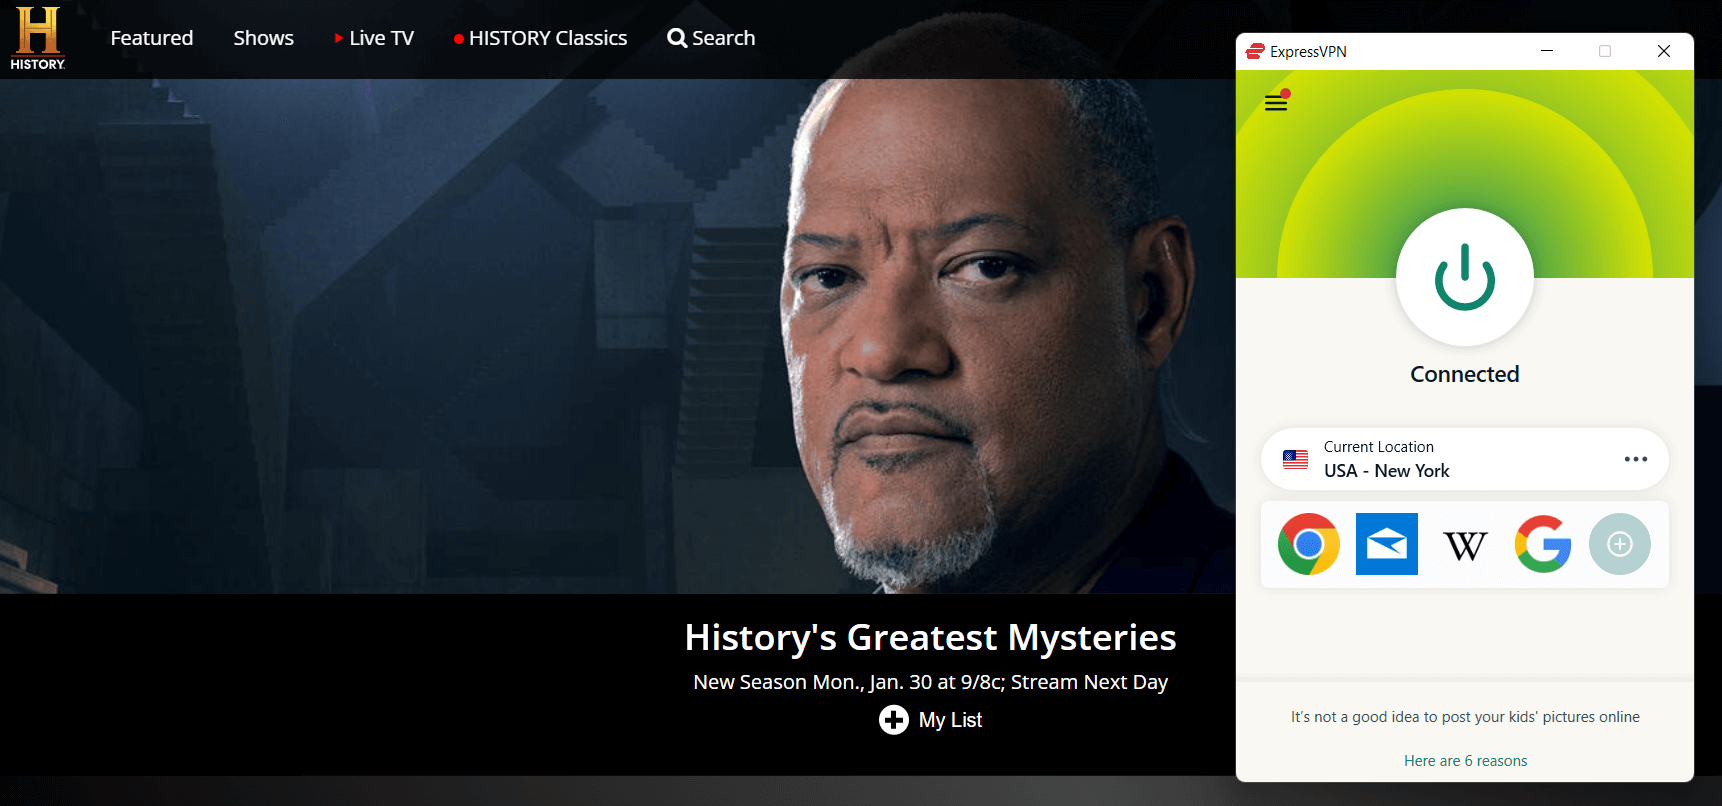 watch-historys-greatest-mysteries-on-discovery-plus-through-history-channel-outside-usa-using-expressvpn